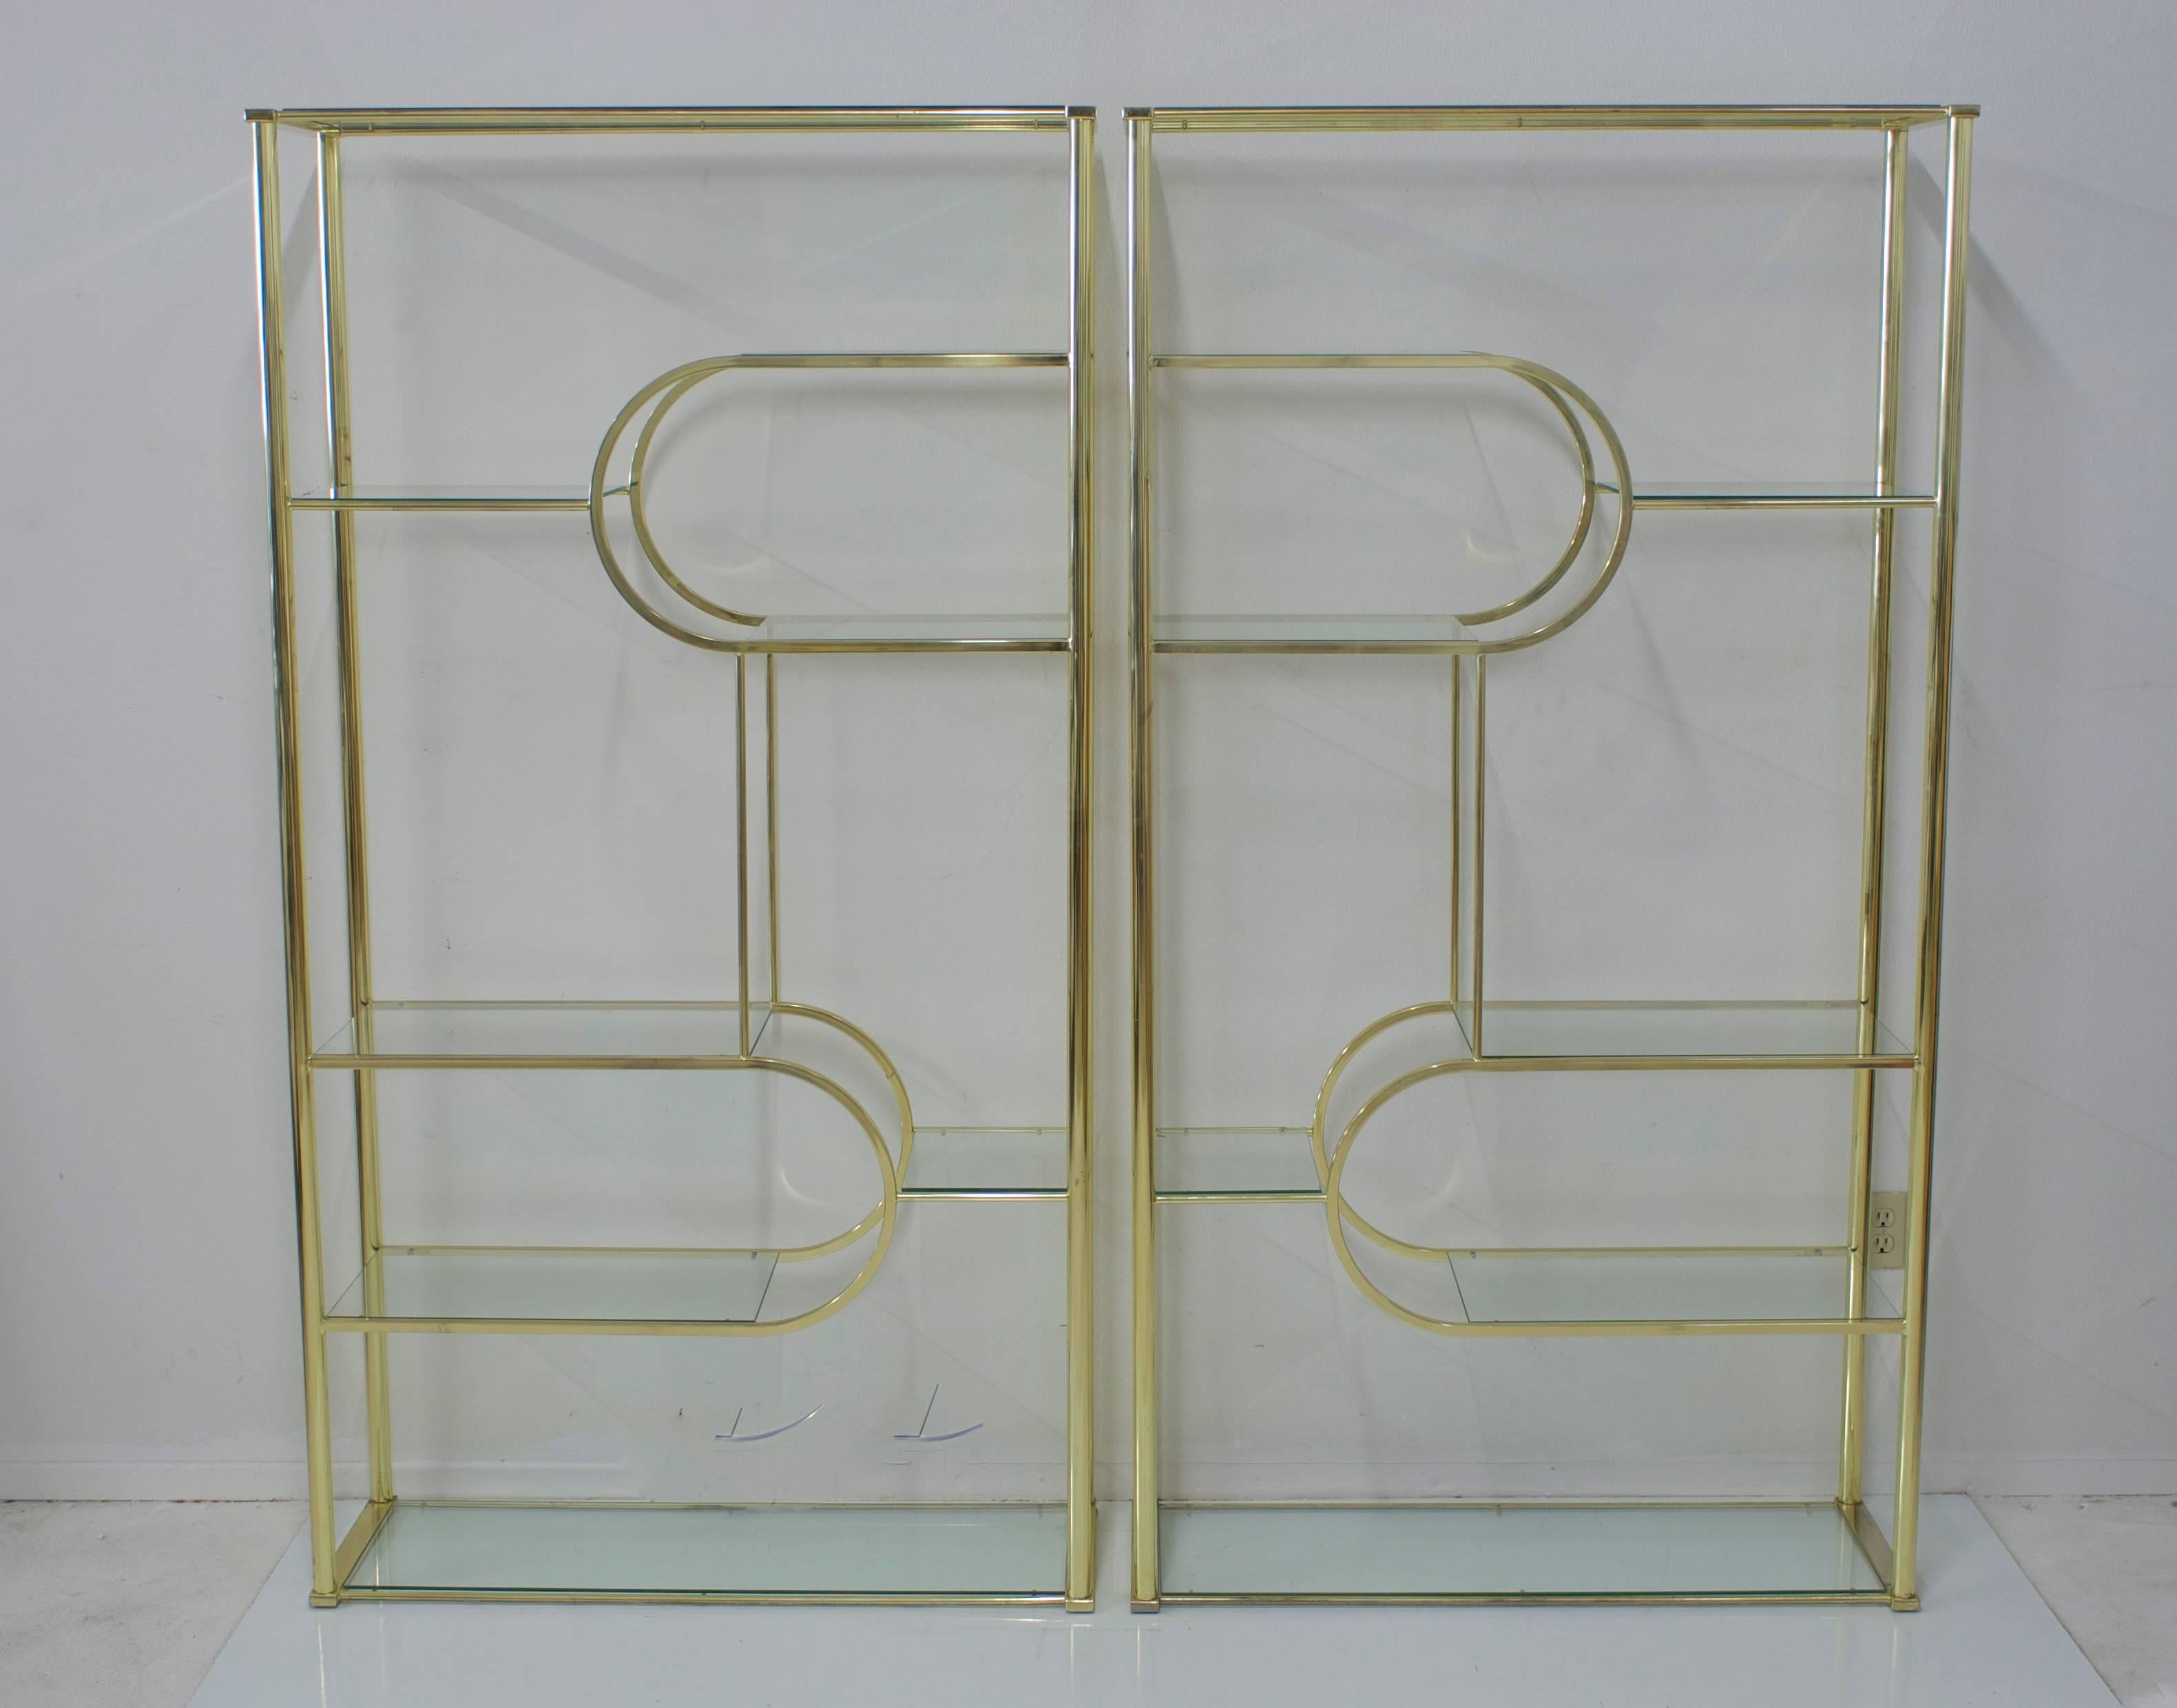 A sculptural pair of etageres or room dividers that create different geometric patterns depending on which ends you push together. They also look great on their own. There are eight glass shelves on each unit including the top and bottom. We have